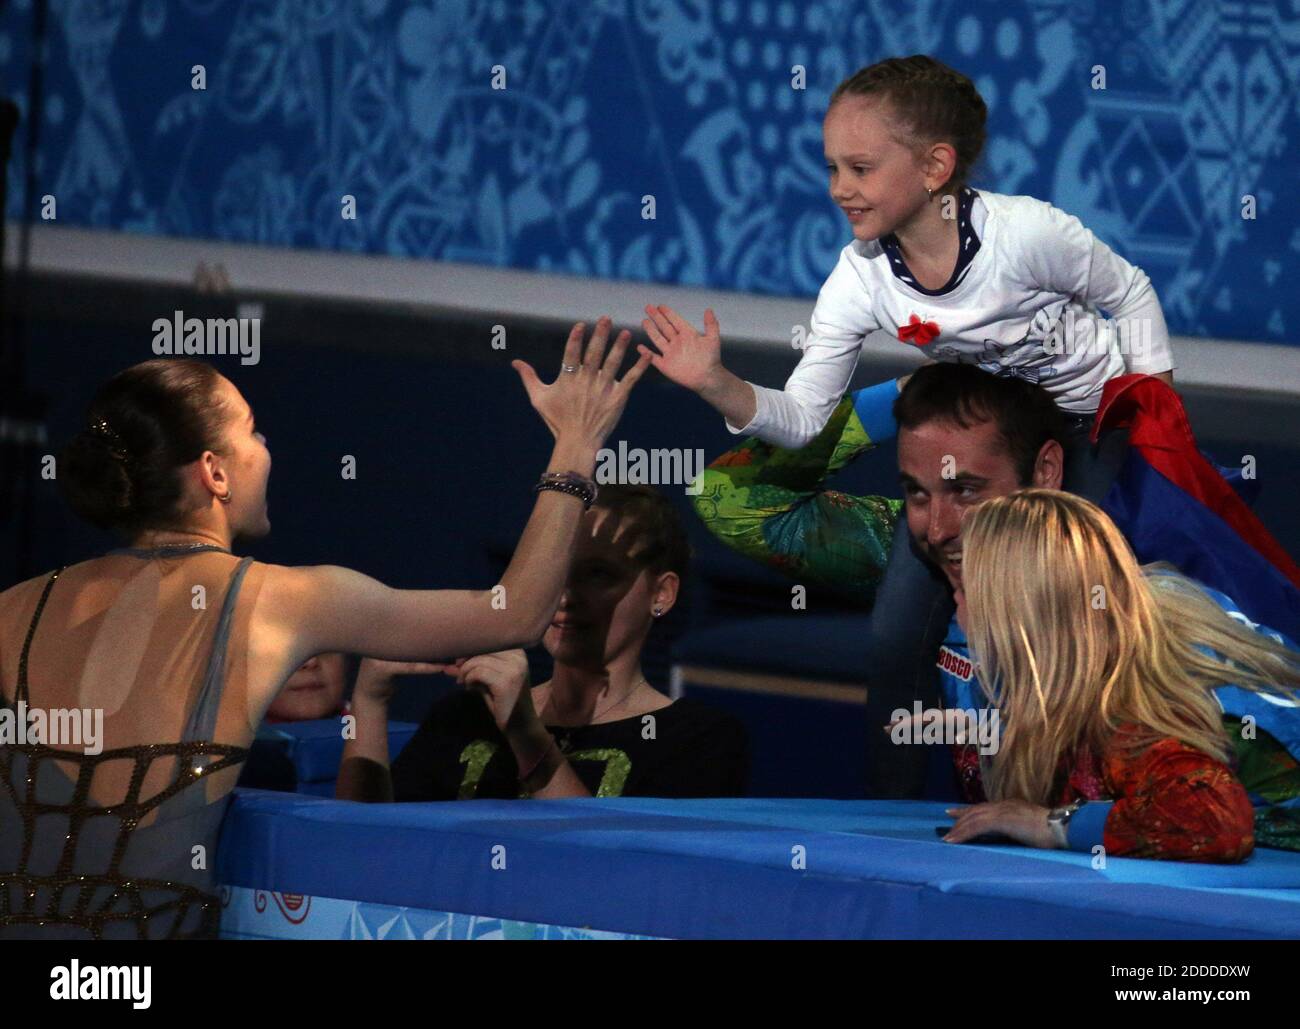 NO FILM, NO VIDEO, NO TV, NO DOCUMENTARY - Gold medalist Adelina Sotnikova of Russia celebrates with a young girl after ladies' figure skating at the Iceberg Skating Palace during the Winter Olympics in Sochi, Russia, Thursday, February 20, 2014. Photo by Brian Cassella/Chicago Tribune/MCT/ABACAPRESS.COM Stock Photo